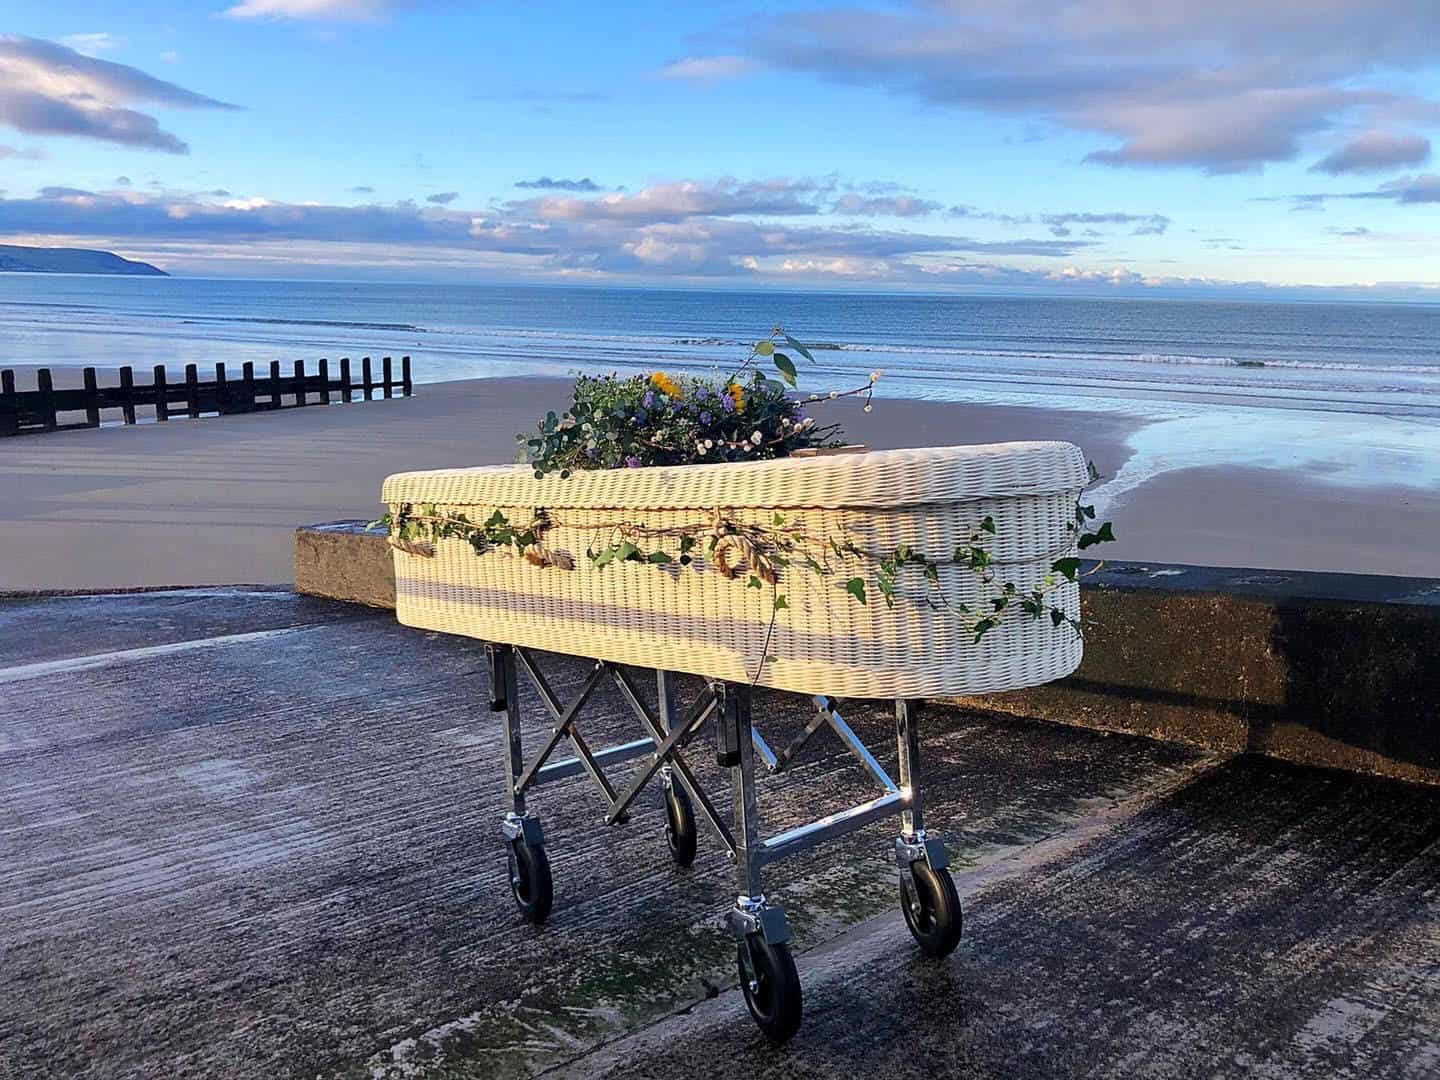 Sustainably crafted wicker coffin with floral garland decoration, positioned on a trolley overlooking a peaceful beach at low tide.